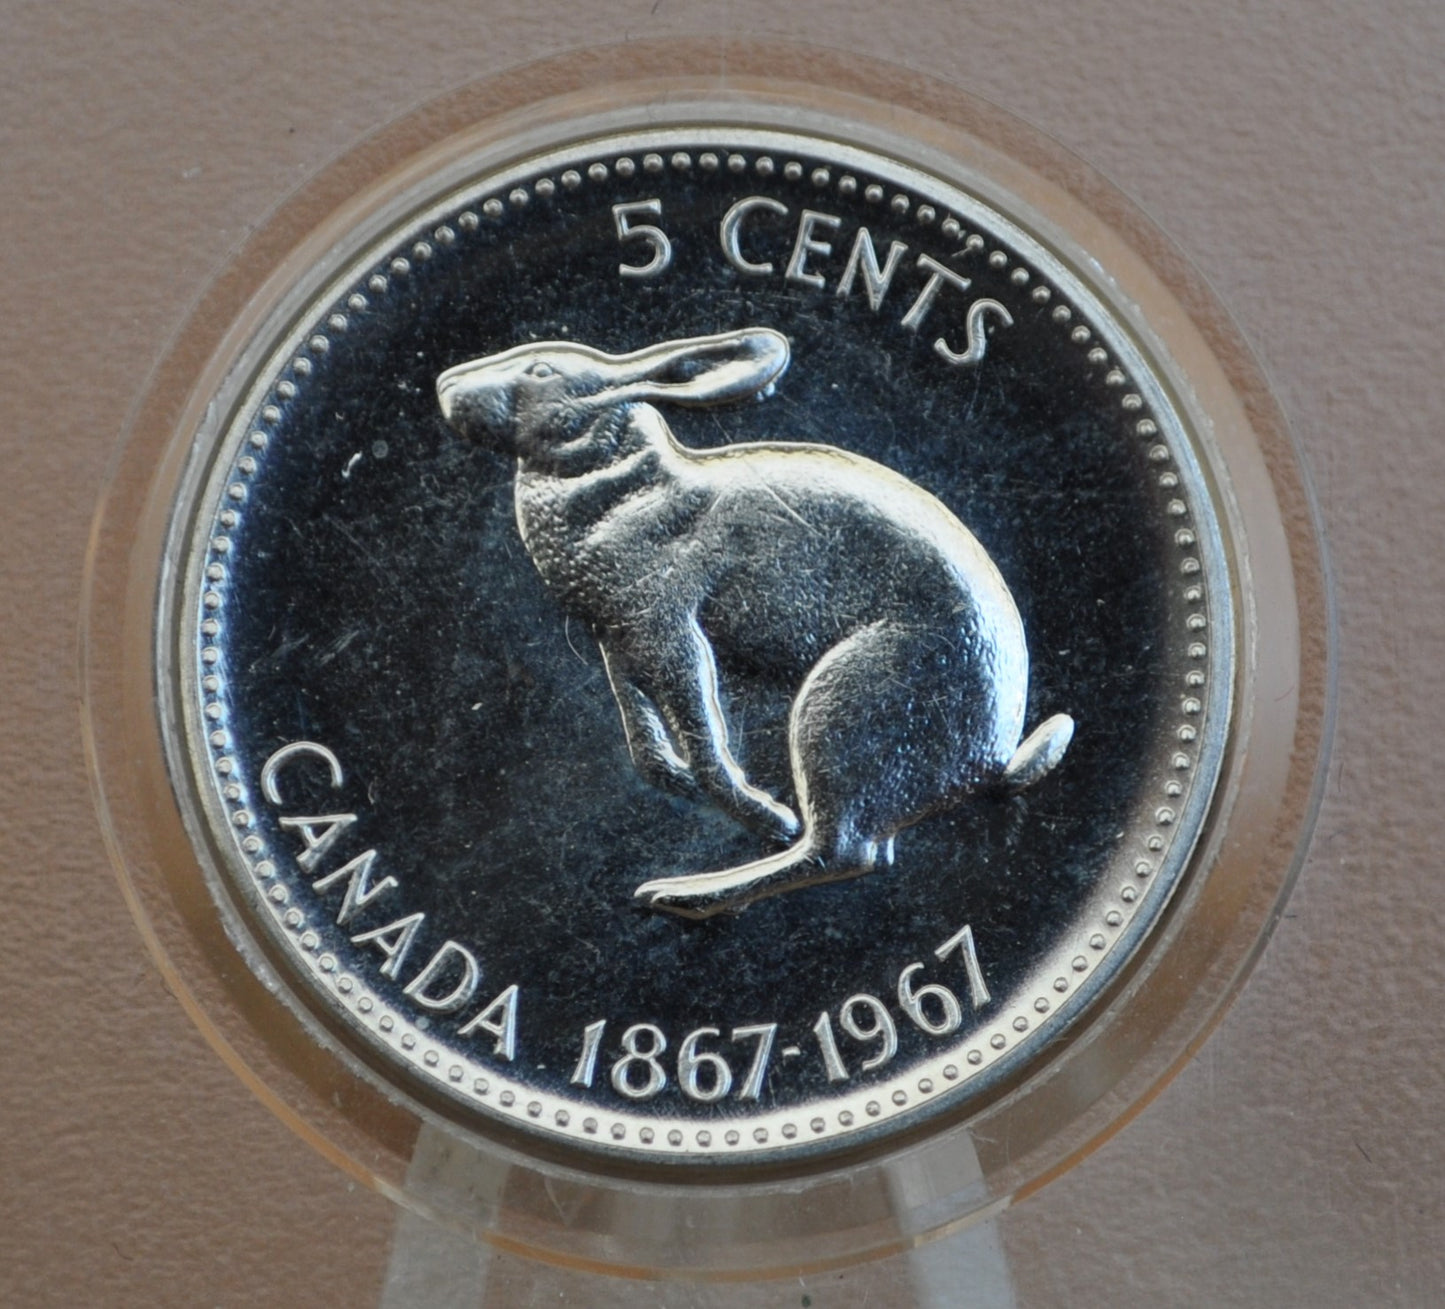 1967 Canadian Nickel, Prooflike - Rabbit / Snow Hare Design, Commemorative, Gem Proof - 5 Cent Coin Canada 1967 Canadian Nickel